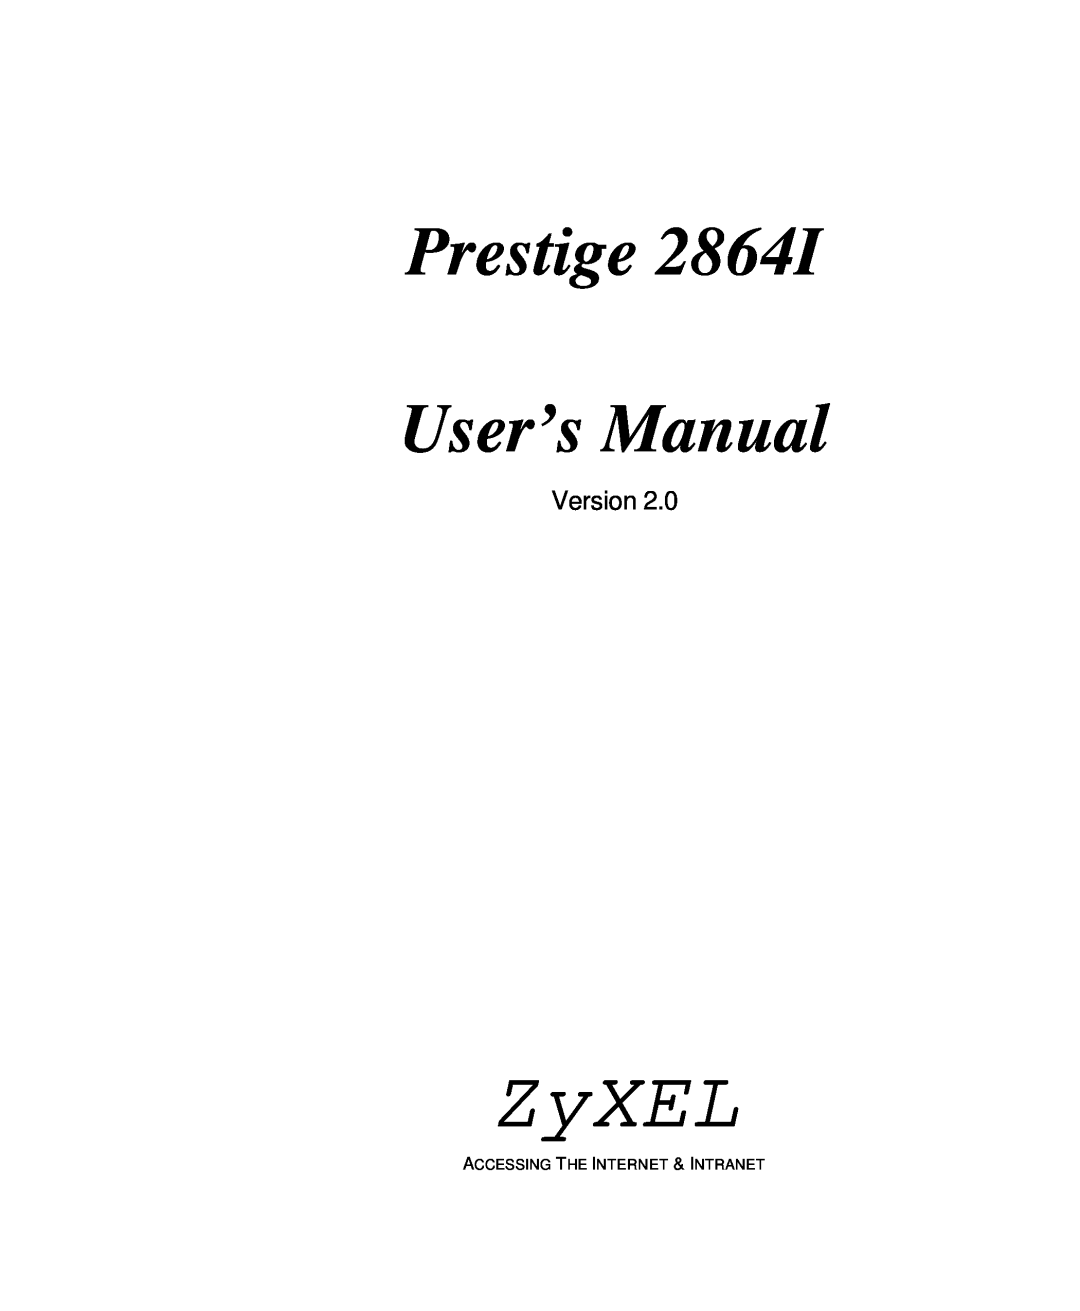 ZyXEL Communications 28641 user manual ZyXEL, Prestige User’s Manual, Version, Accessing The Internet & Intranet 